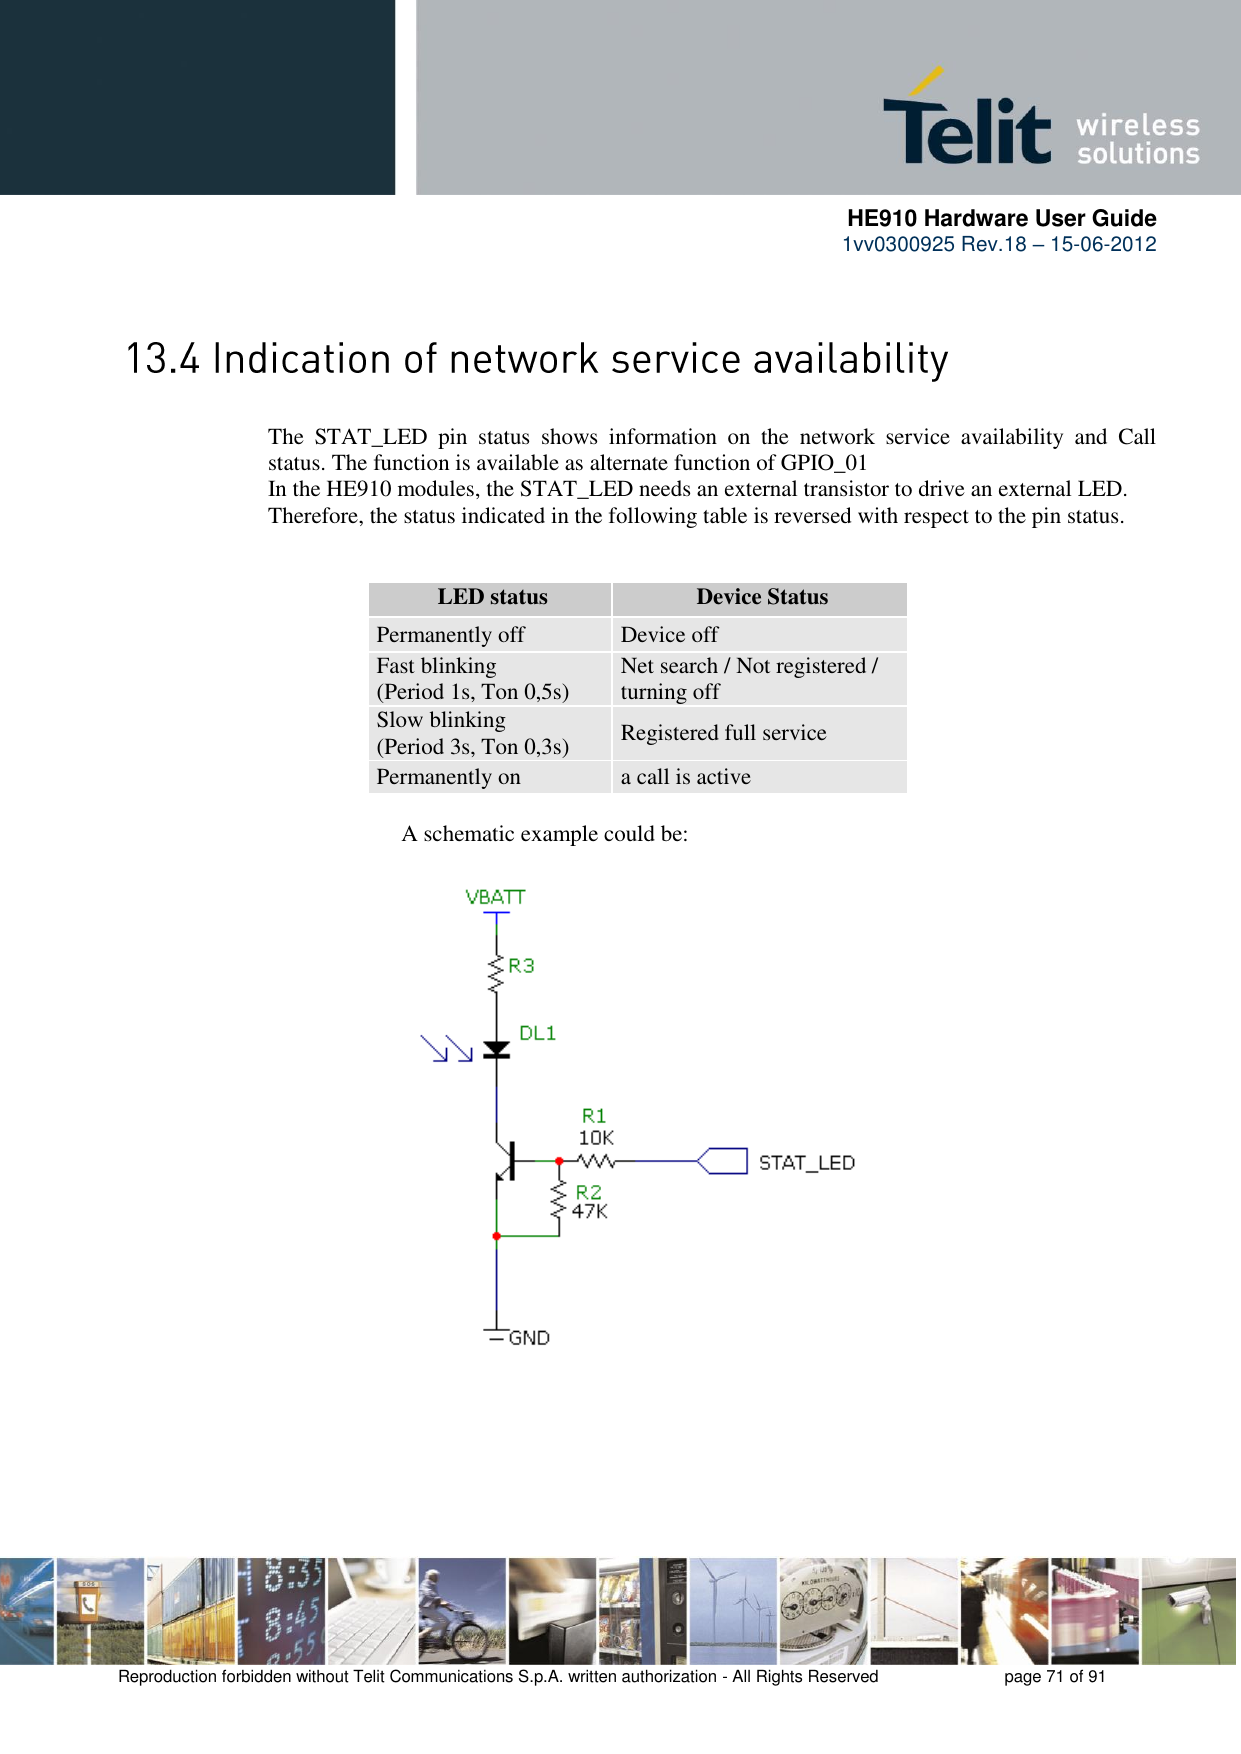      HE910 Hardware User Guide 1vv0300925 Rev.18 – 15-06-2012    Reproduction forbidden without Telit Communications S.p.A. written authorization - All Rights Reserved    page 71 of 91   The  STAT_LED  pin  status  shows  information  on  the  network  service  availability  and  Call status. The function is available as alternate function of GPIO_01 In the HE910 modules, the STAT_LED needs an external transistor to drive an external LED. Therefore, the status indicated in the following table is reversed with respect to the pin status.              LED status Device Status Permanently off Device off Fast blinking (Period 1s, Ton 0,5s) Net search / Not registered / turning off Slow blinking (Period 3s, Ton 0,3s) Registered full service Permanently on a call is active           A schematic example could be: 